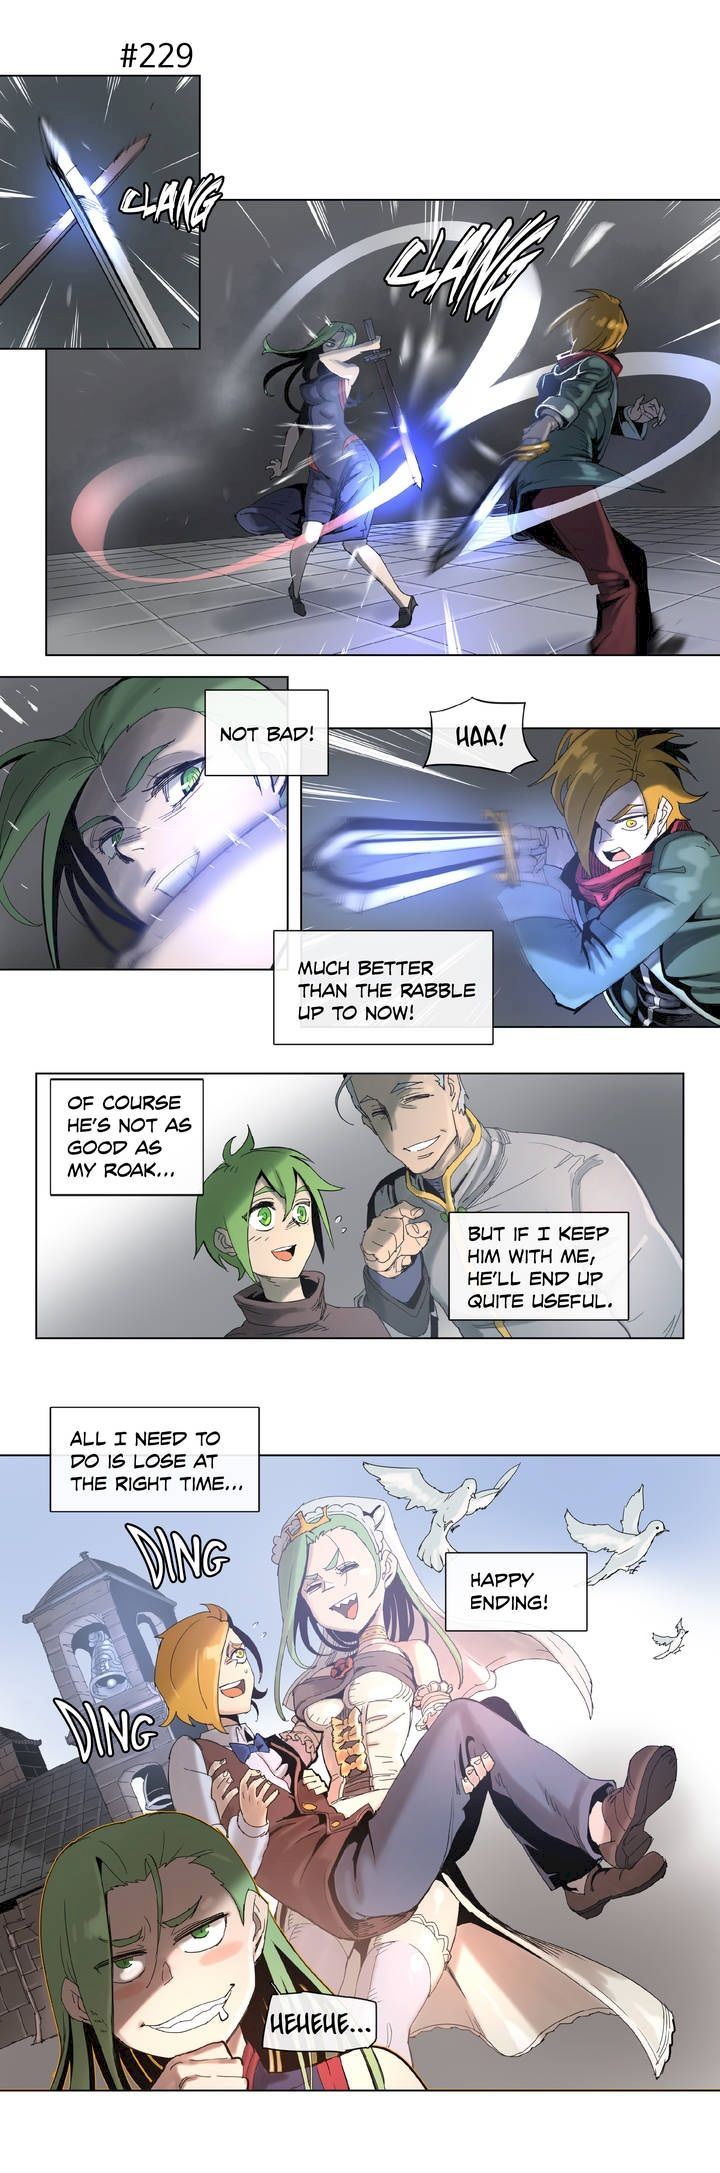 4 Cut Hero - Chapter 44 Page 4